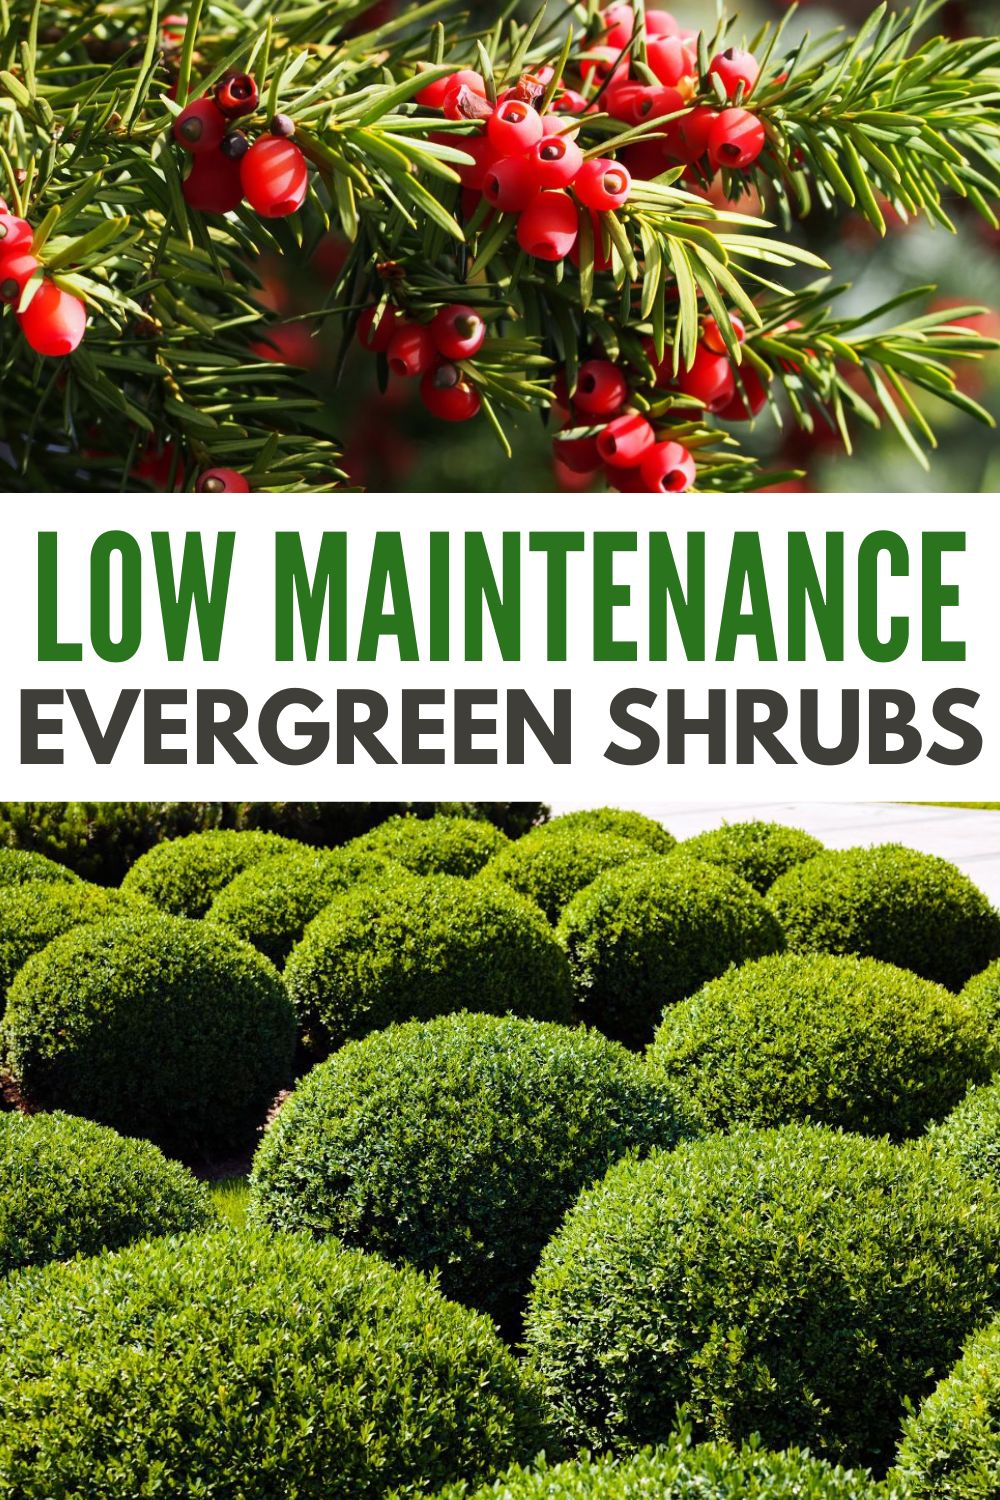 Low maintenance evergreen shrubs will add some greenery and texture to your landscape without the hassle of constant maintenance. #lowmaintenanceevergreenshrubs #evergreens #evergreenshrubs #lowmaintenance #hedge via @wondermomwannab